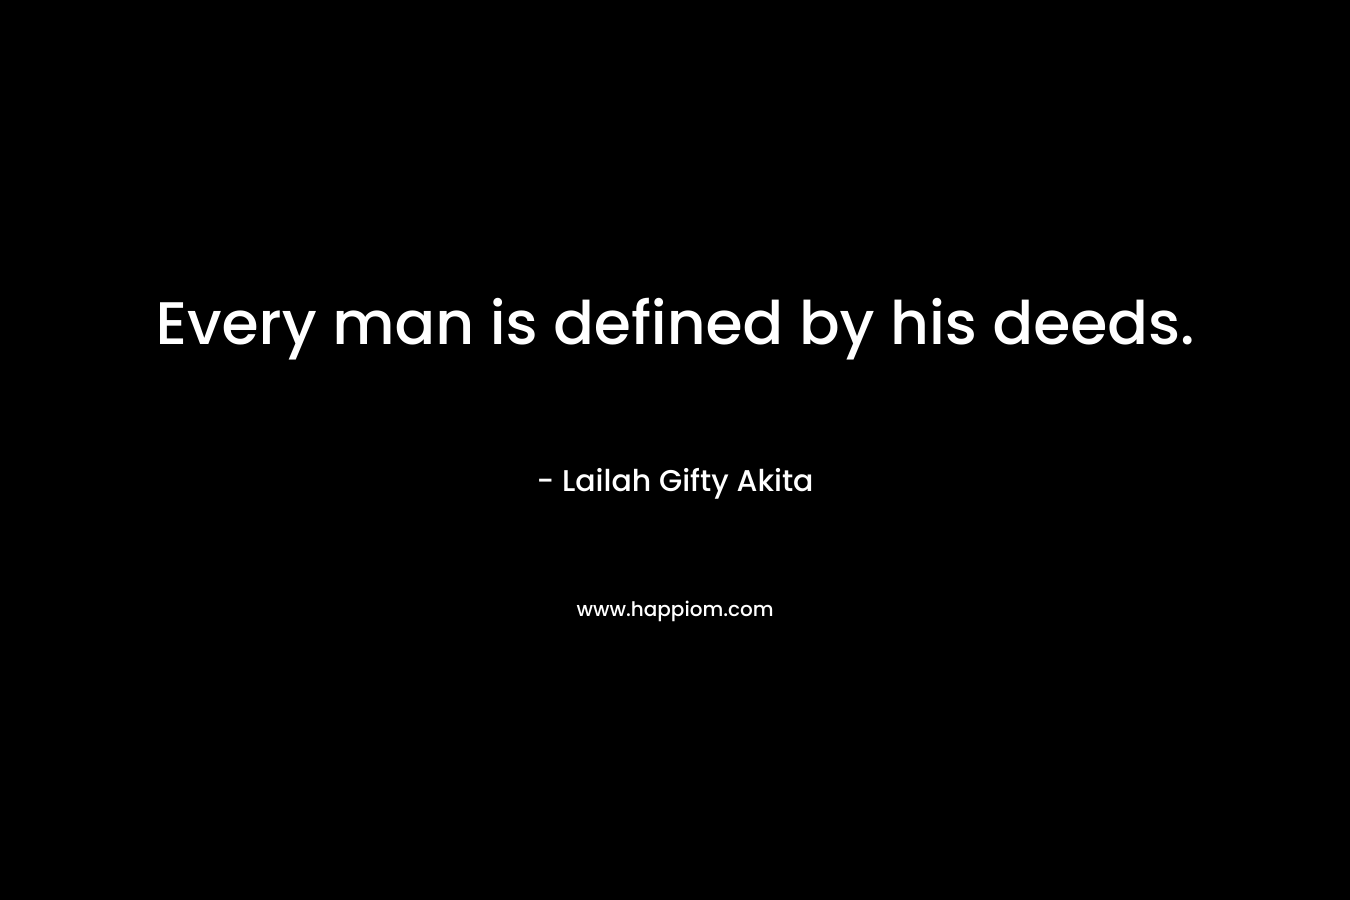 Every man is defined by his deeds.